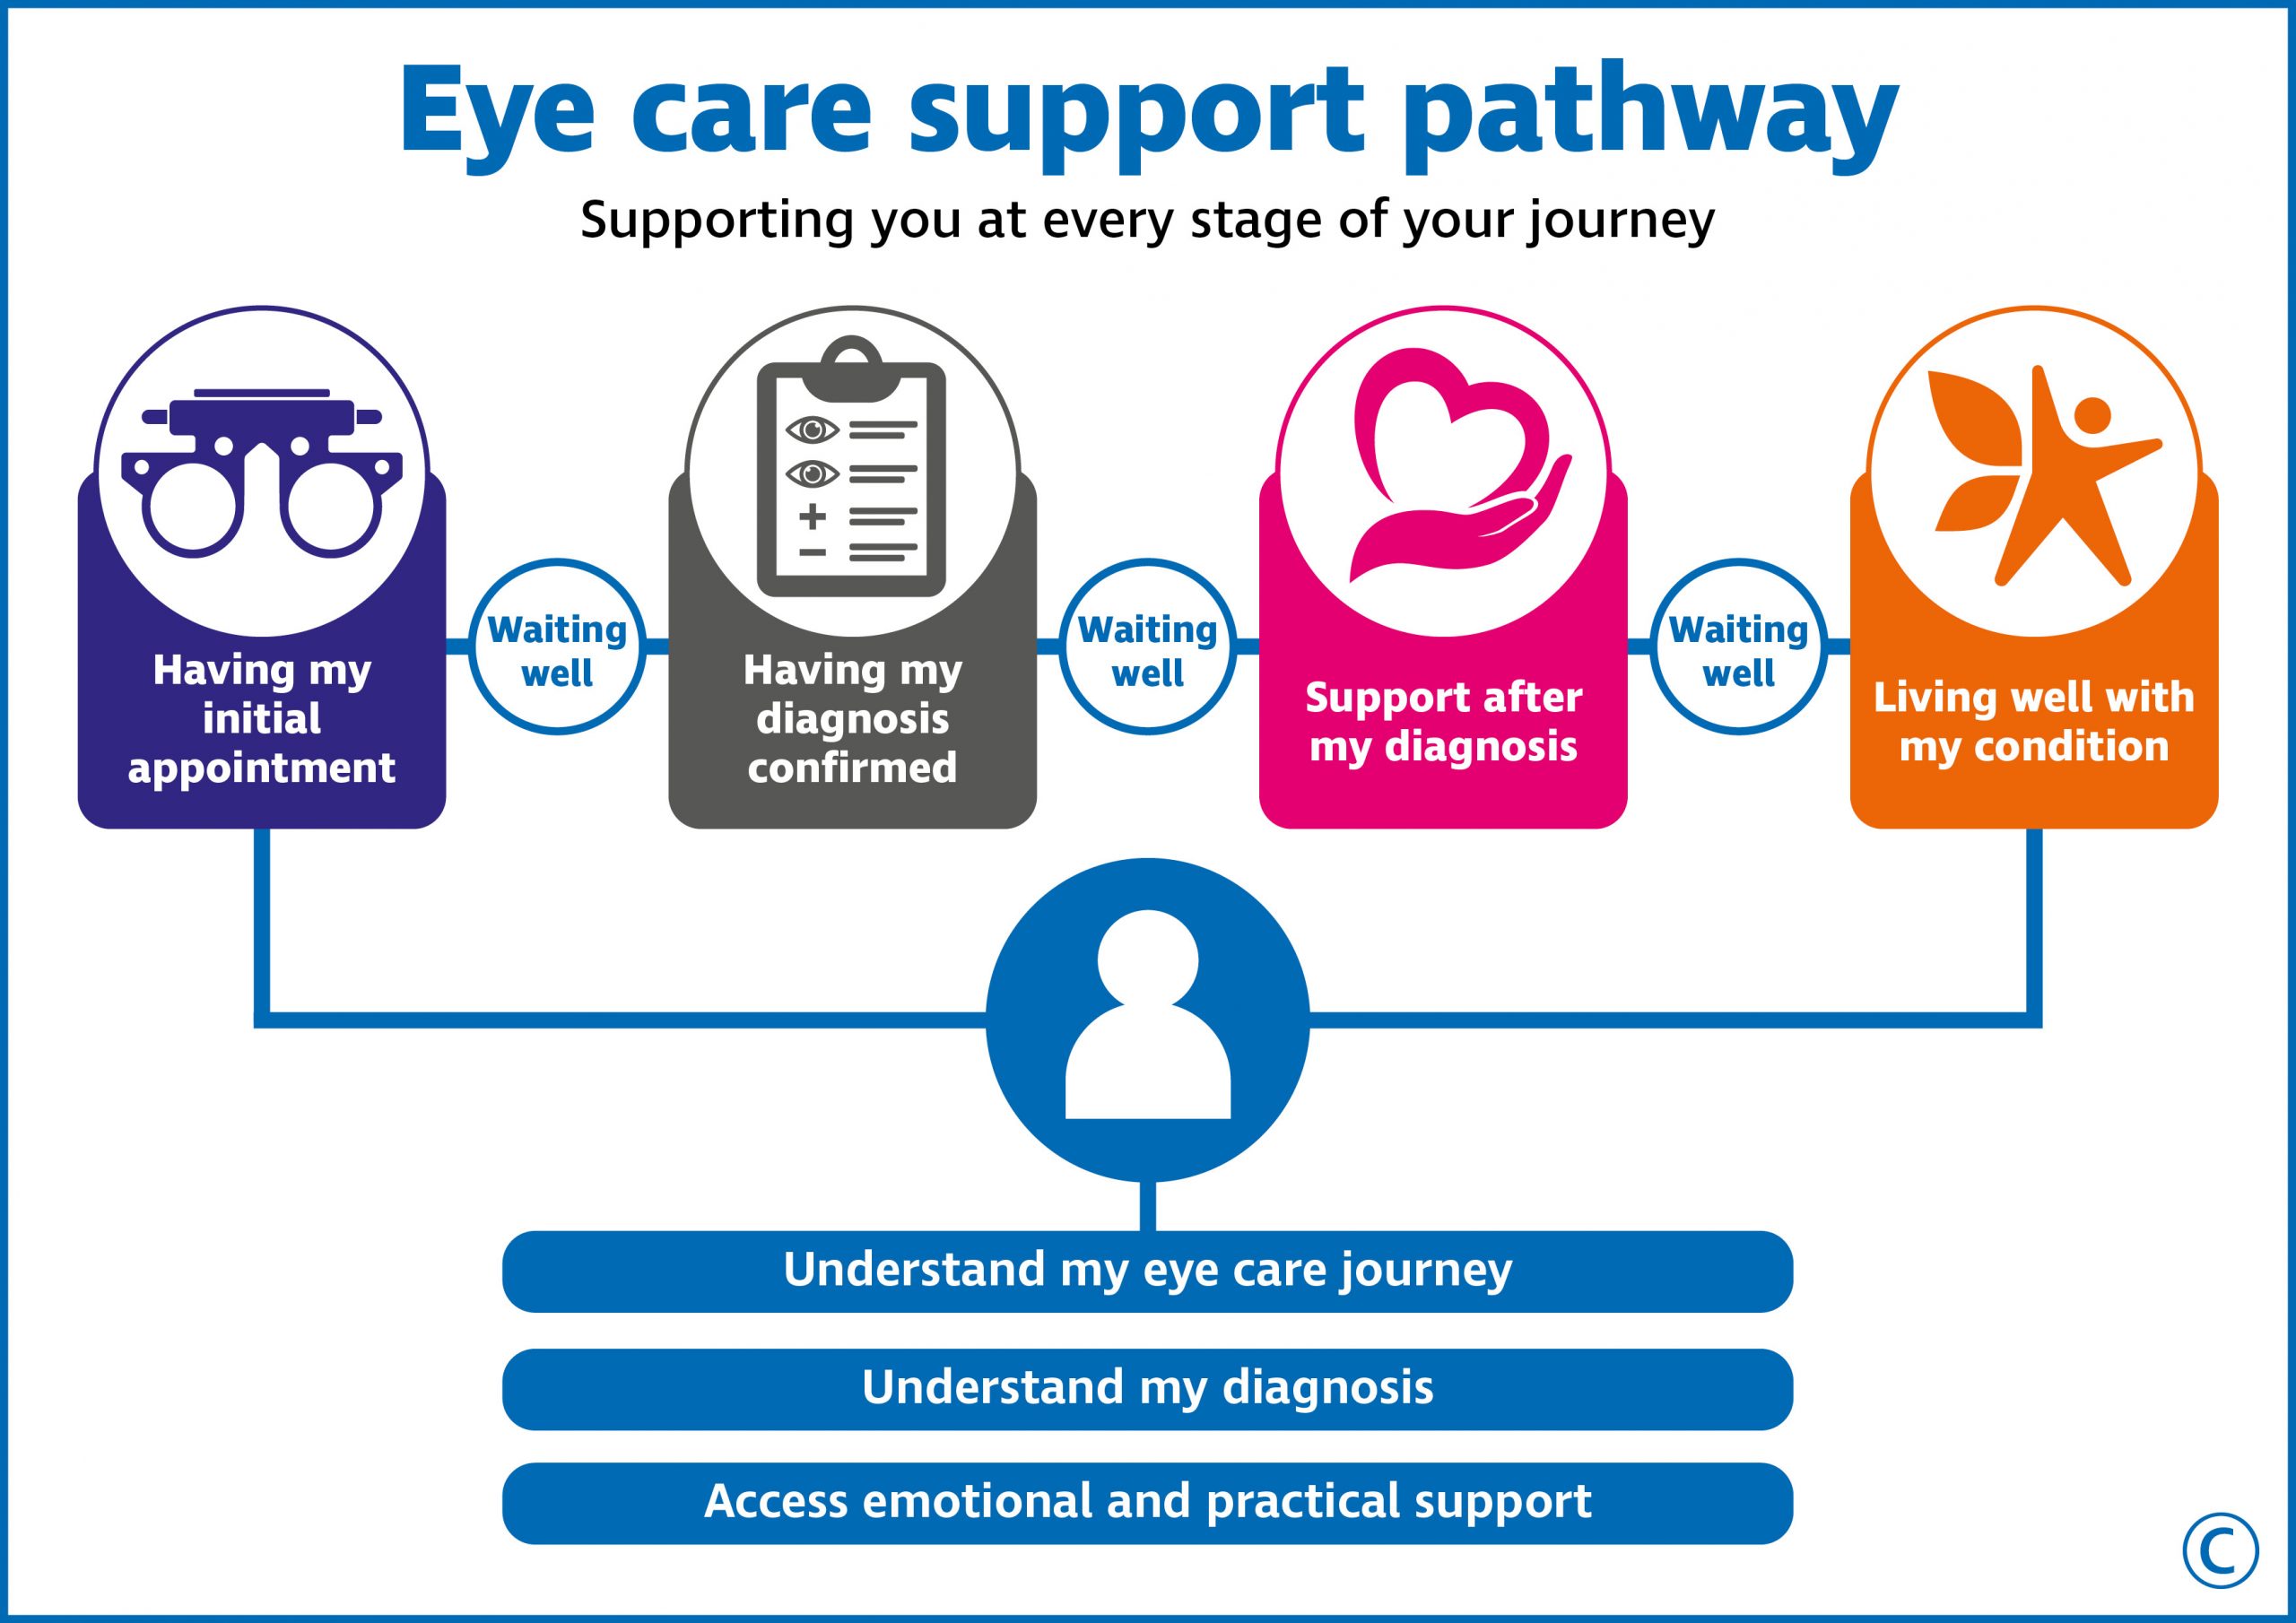 The text in graphic says: Eye care support pathway Supporting you at every stage of your journey Underneath a graphic shows the four stages of an individual’s journey with the following text: 1. Having my initial appointment 2. Waiting well 3. Having my diagnosis confirmed 4. Waiting well 5. Support after my diagnosis 6. Waiting well 7. Living well with my condition Underneath this graphic it outlines what an individual can expect on their journey. Understand my eye care journey Understand my diagnosis Access emotional and practical support 